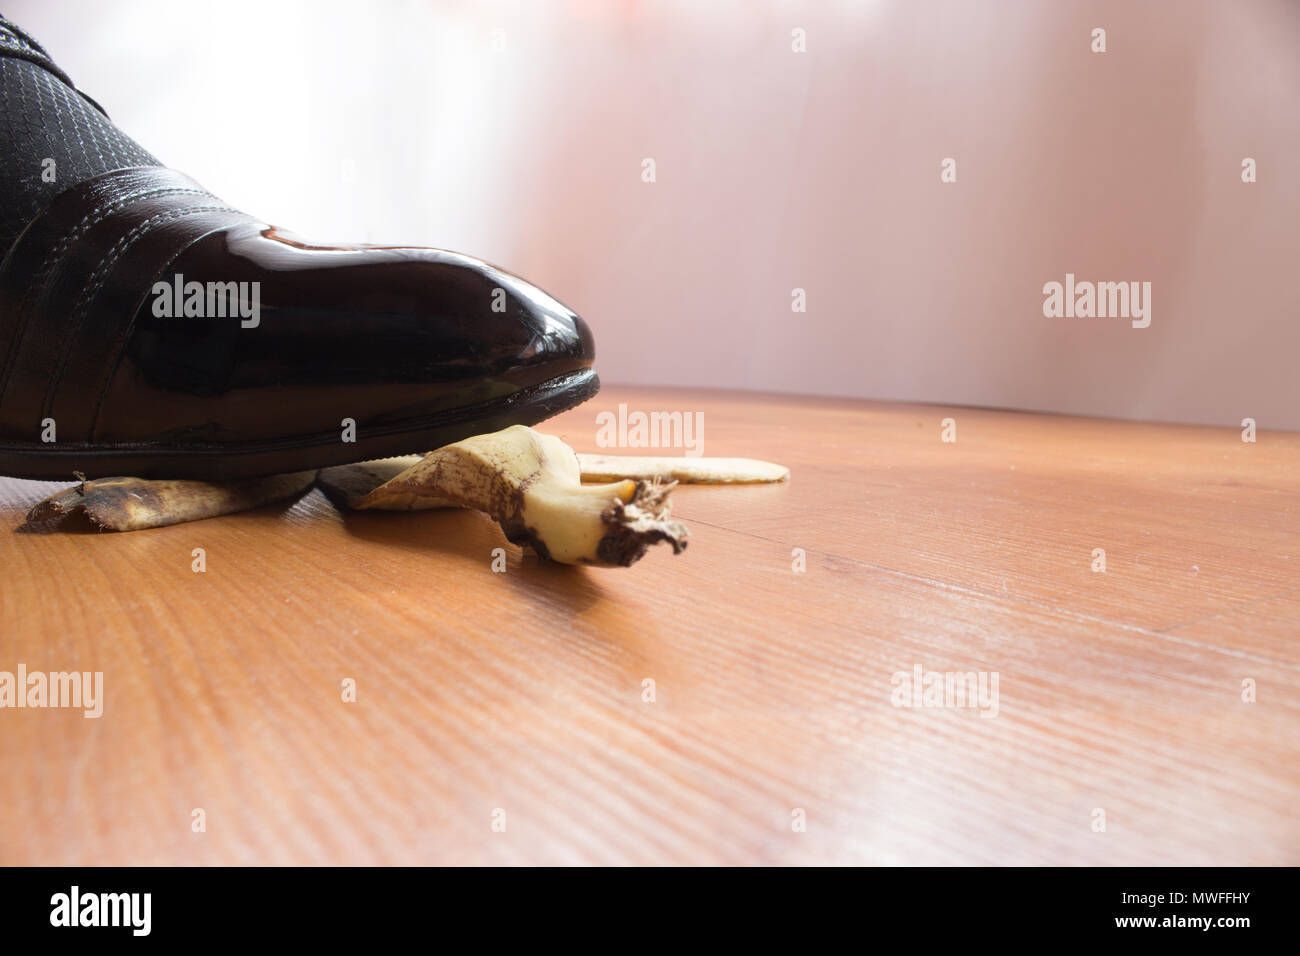 Black patent shoe of young man slipped on a banana peel. Stock Photo